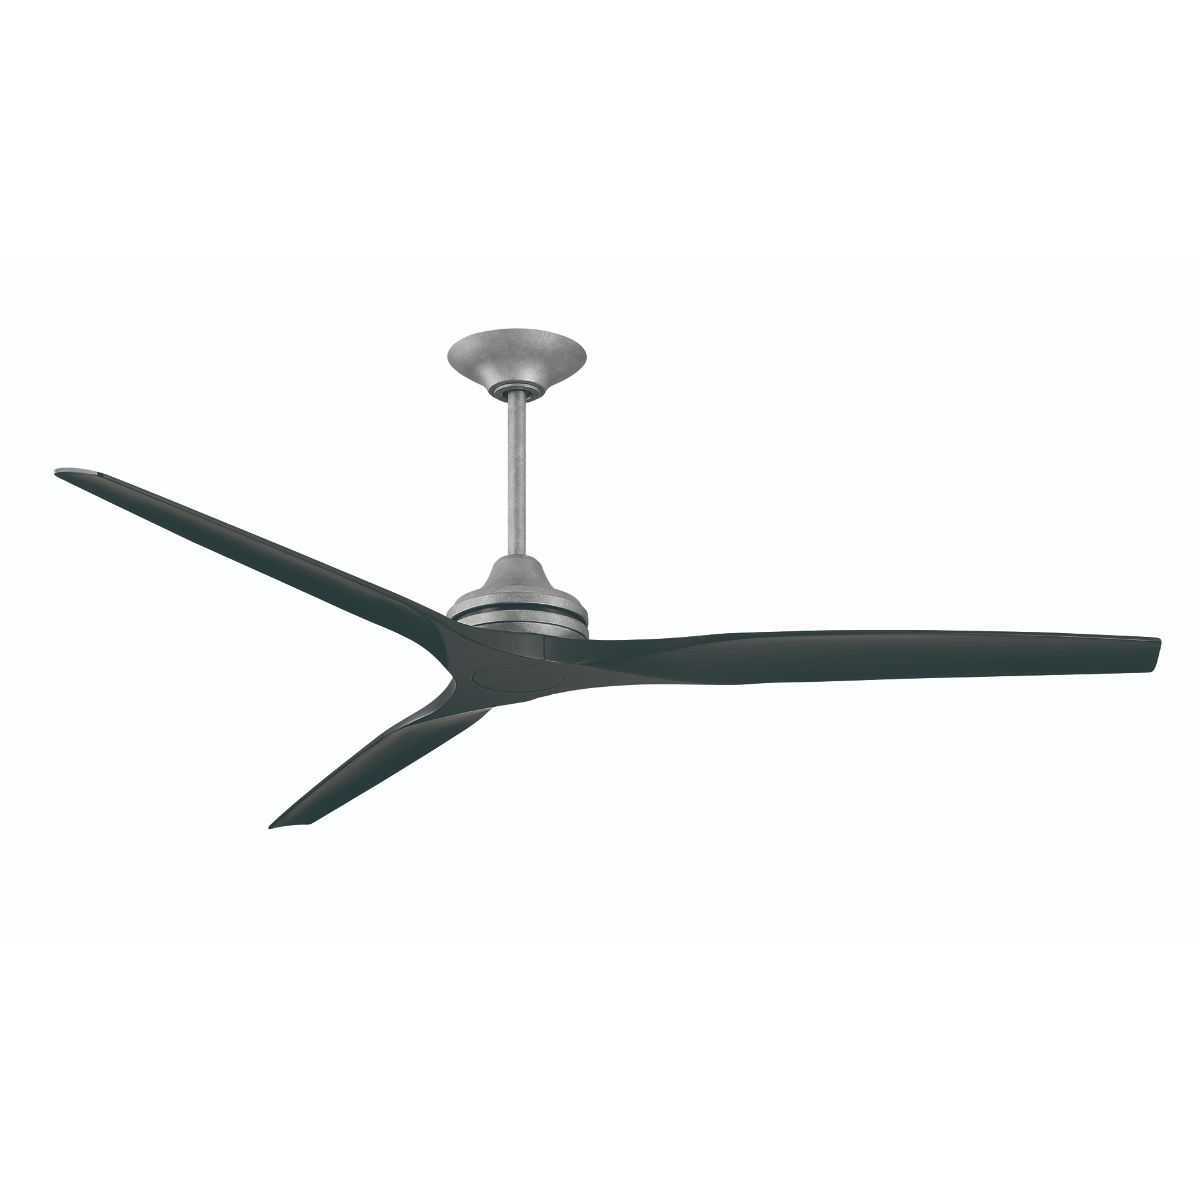 Spitfire DC Outdoor Ceiling Fan Motor With Remote, Galvanized Finish, Set of 3 Blades Sold Separately